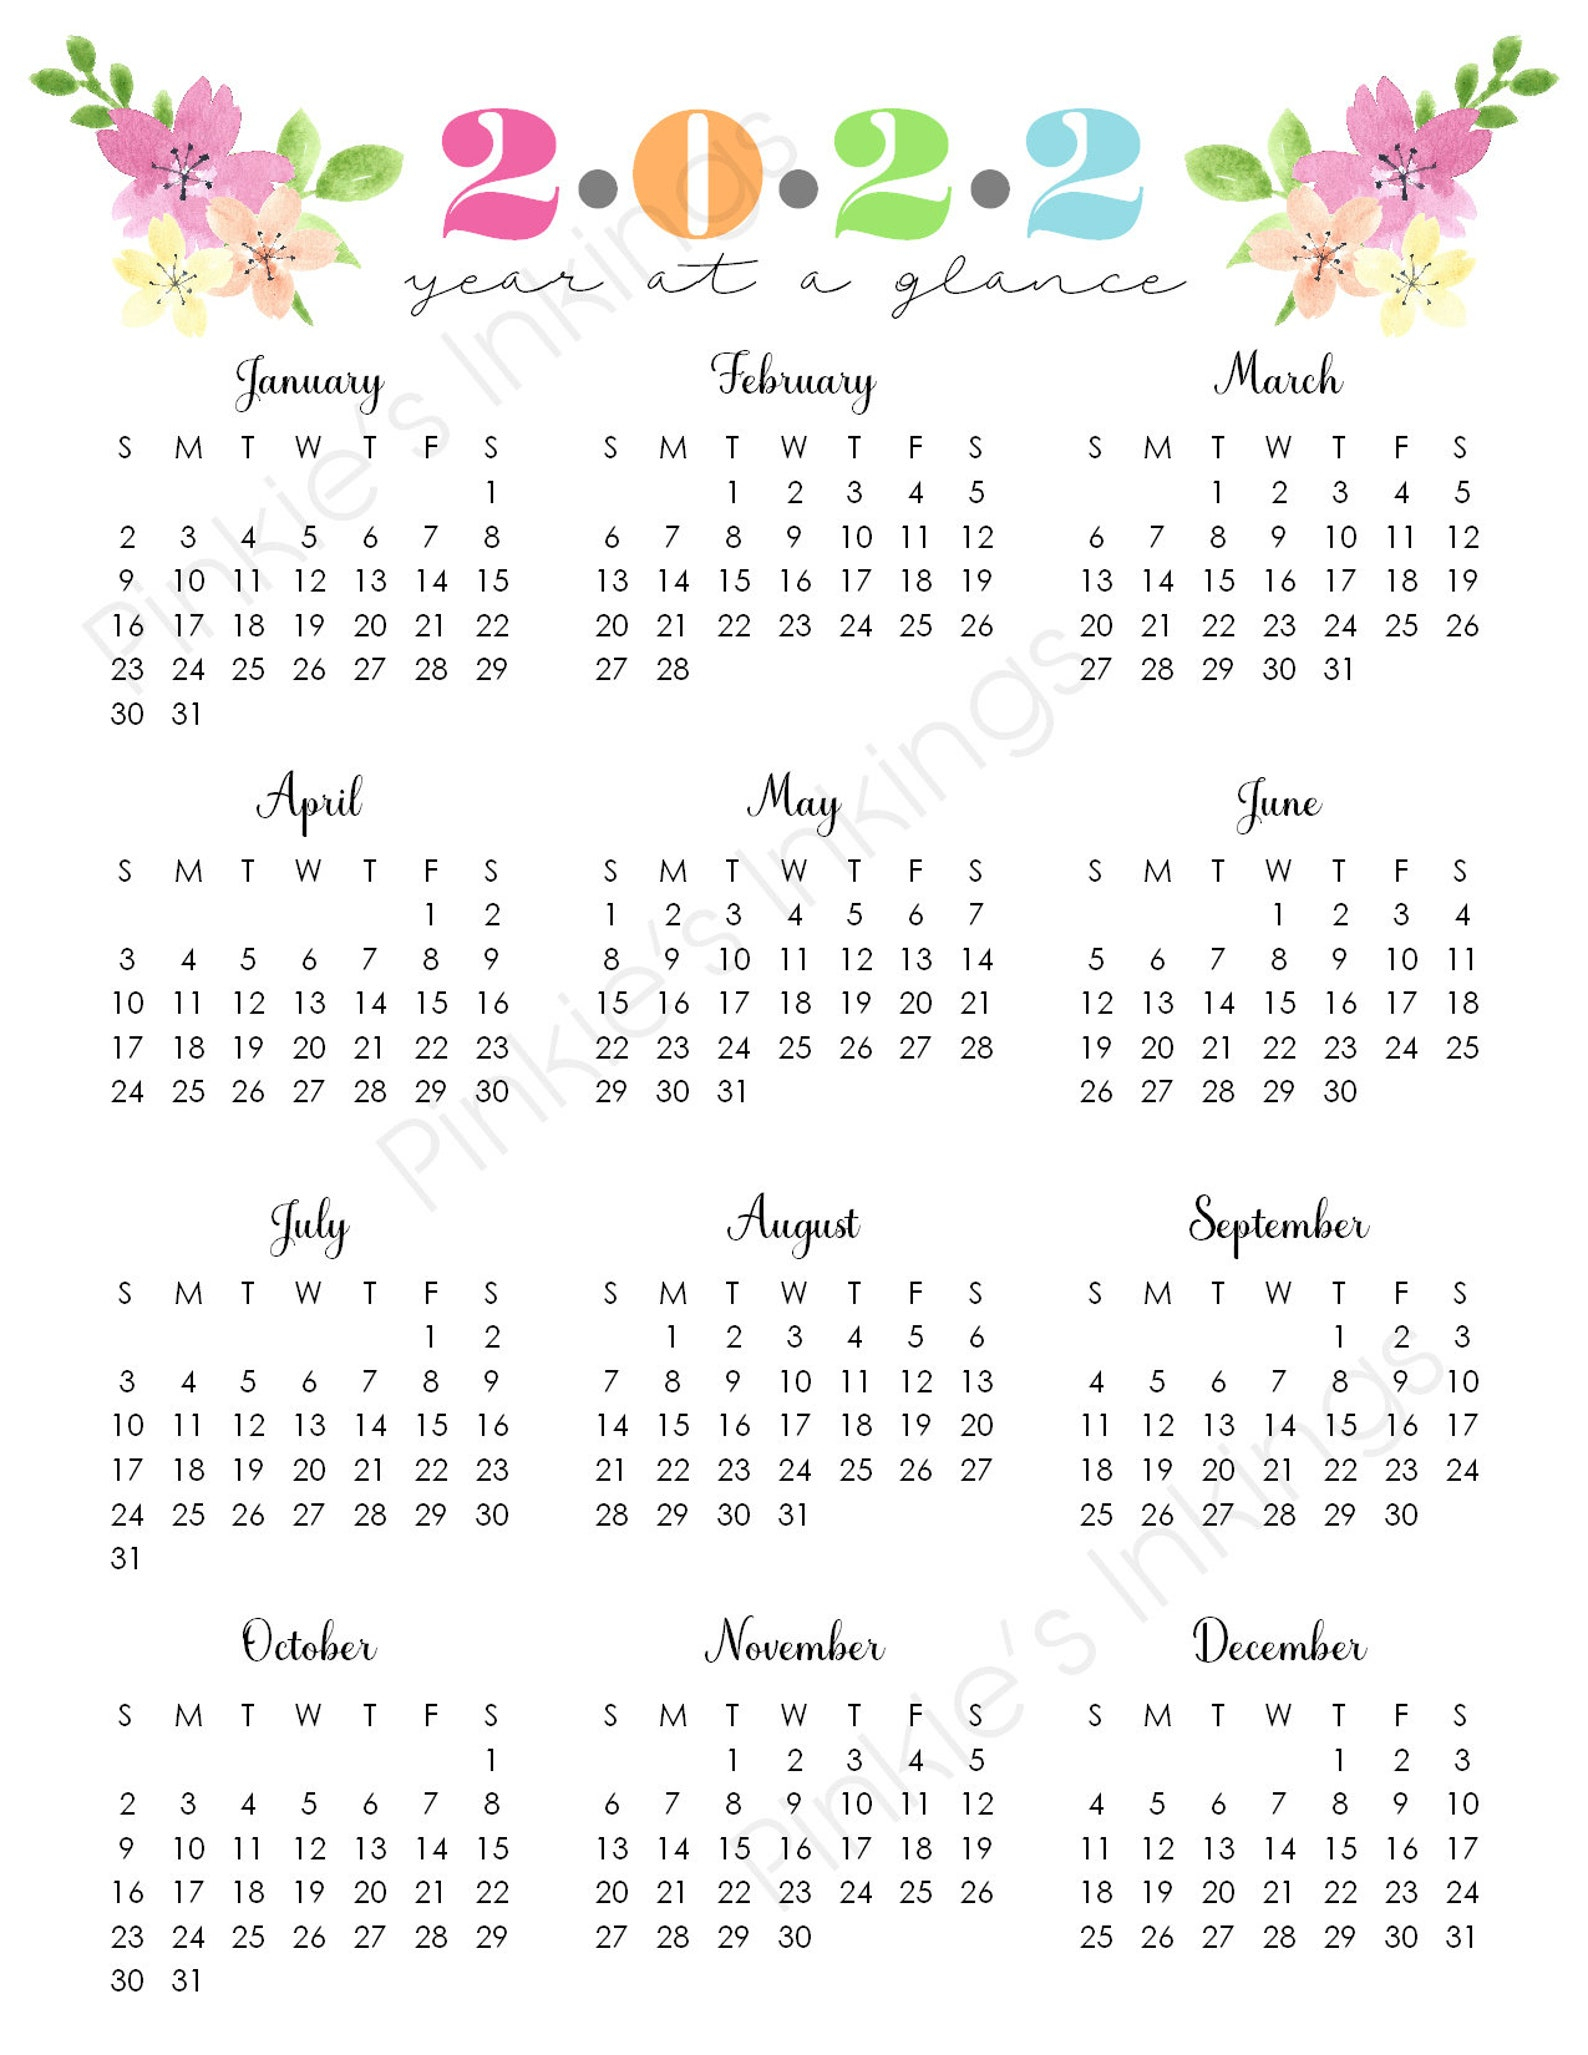 Printable 2022 Year At A Glance 8.5X11 Wall | Etsy in Year At A Glance Calendar 2022